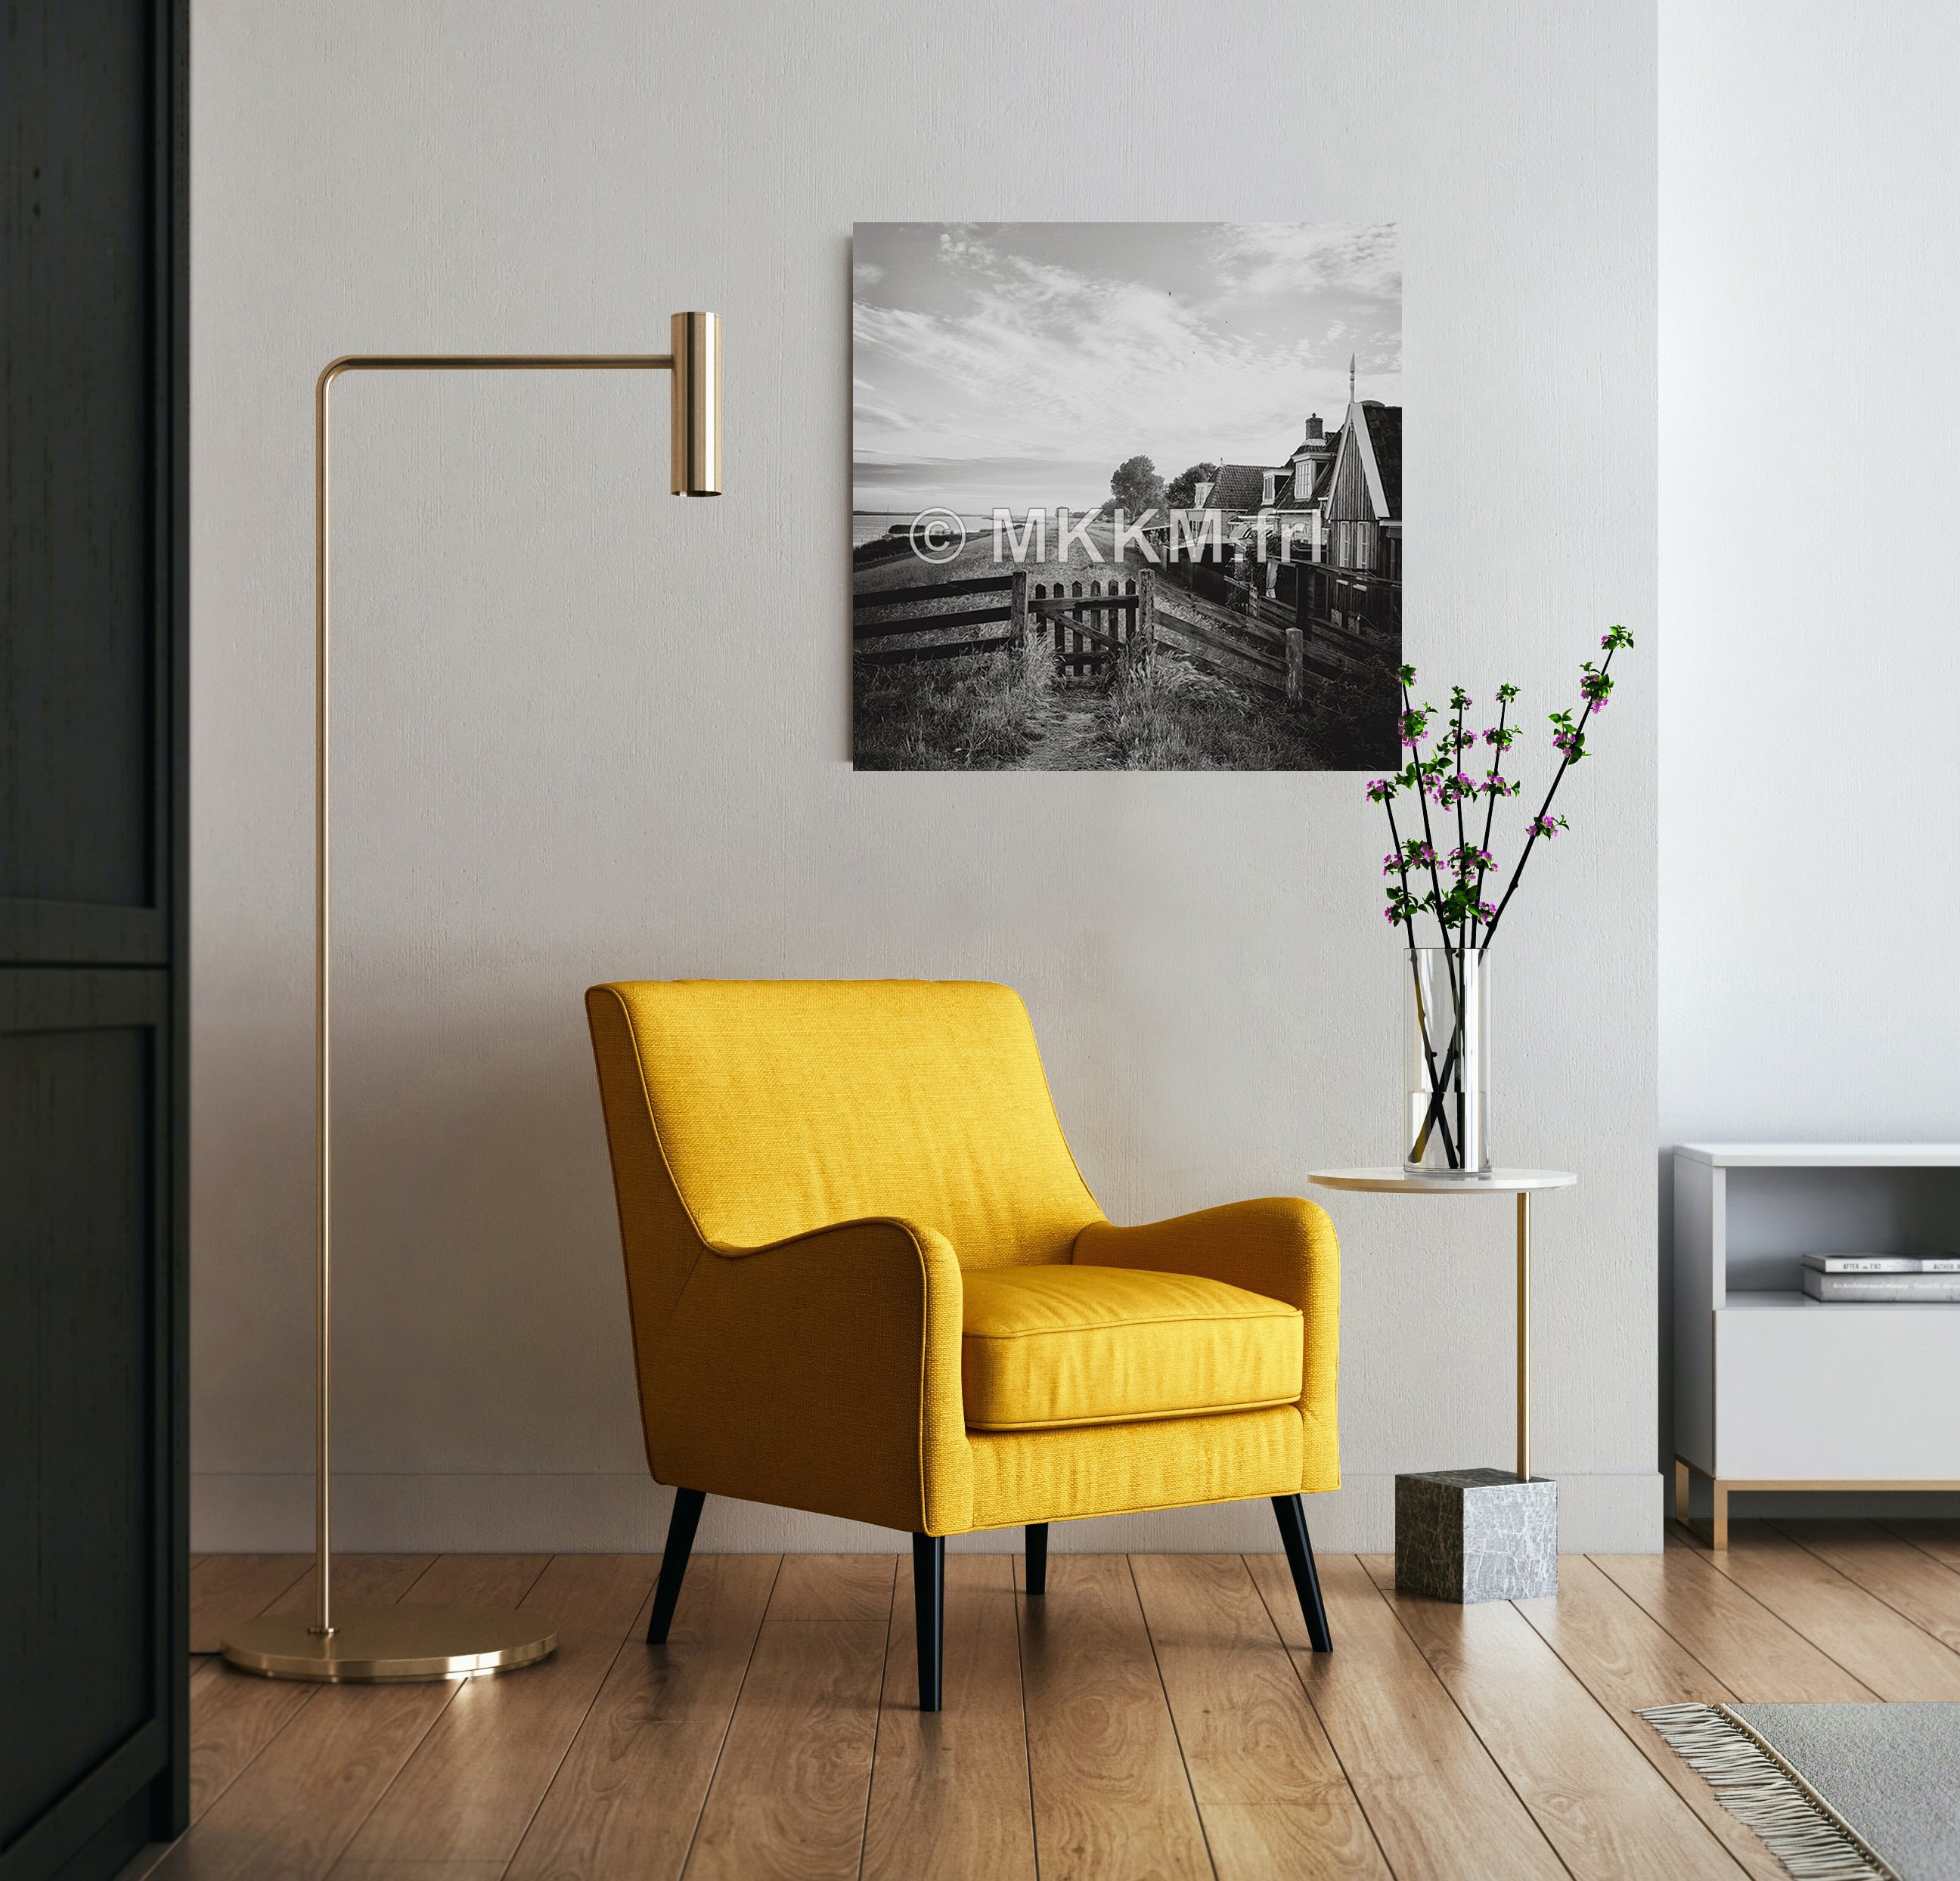 Wall decoration Makkum choice of several images 